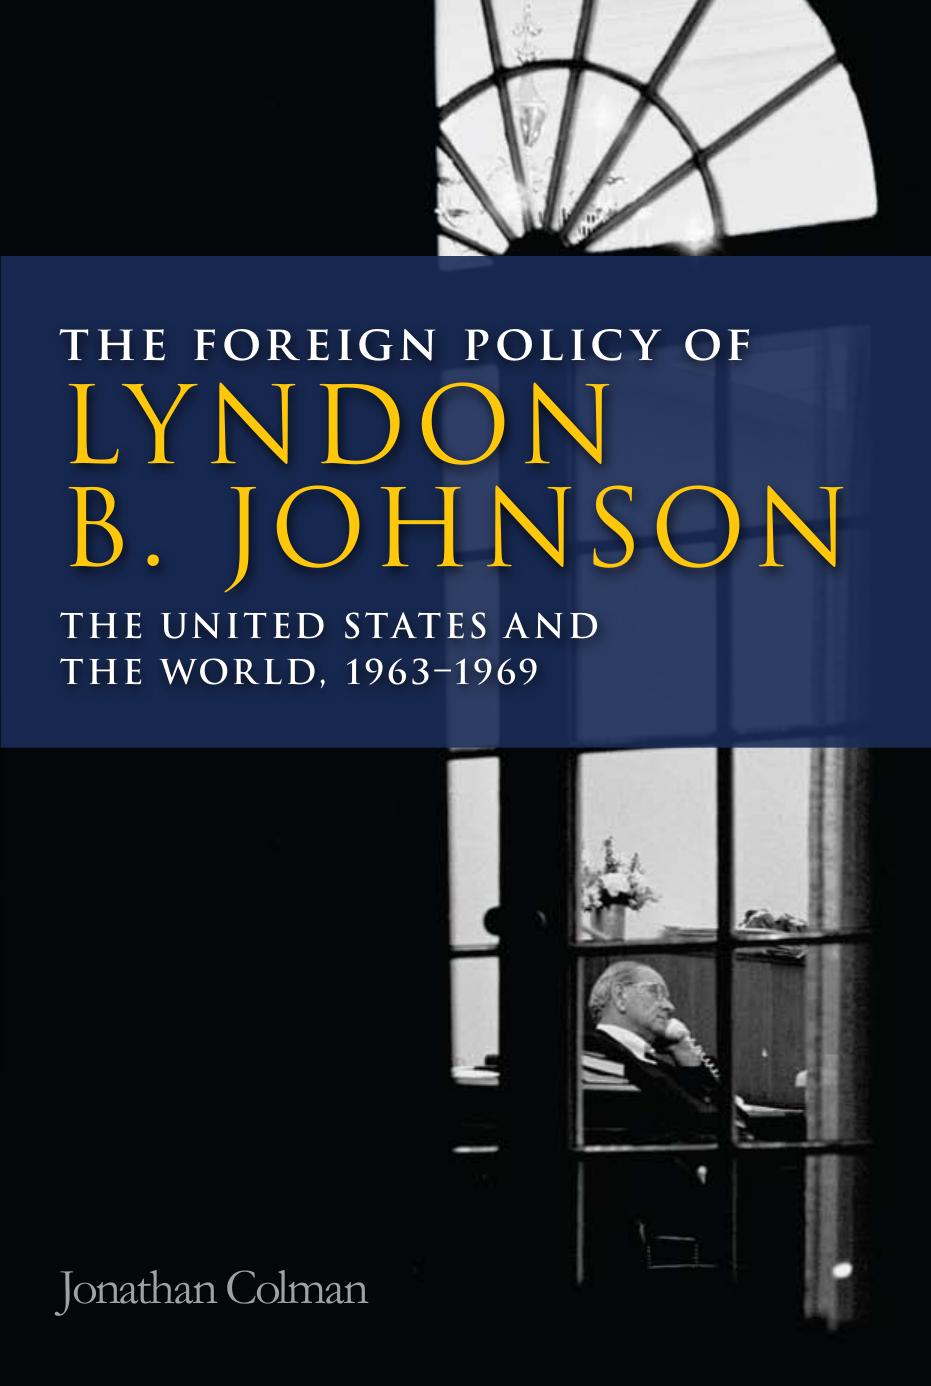 Foreign Policy of Lyndon B. Johnson : The United States and the World, 1963-69 by Jonathan Colman